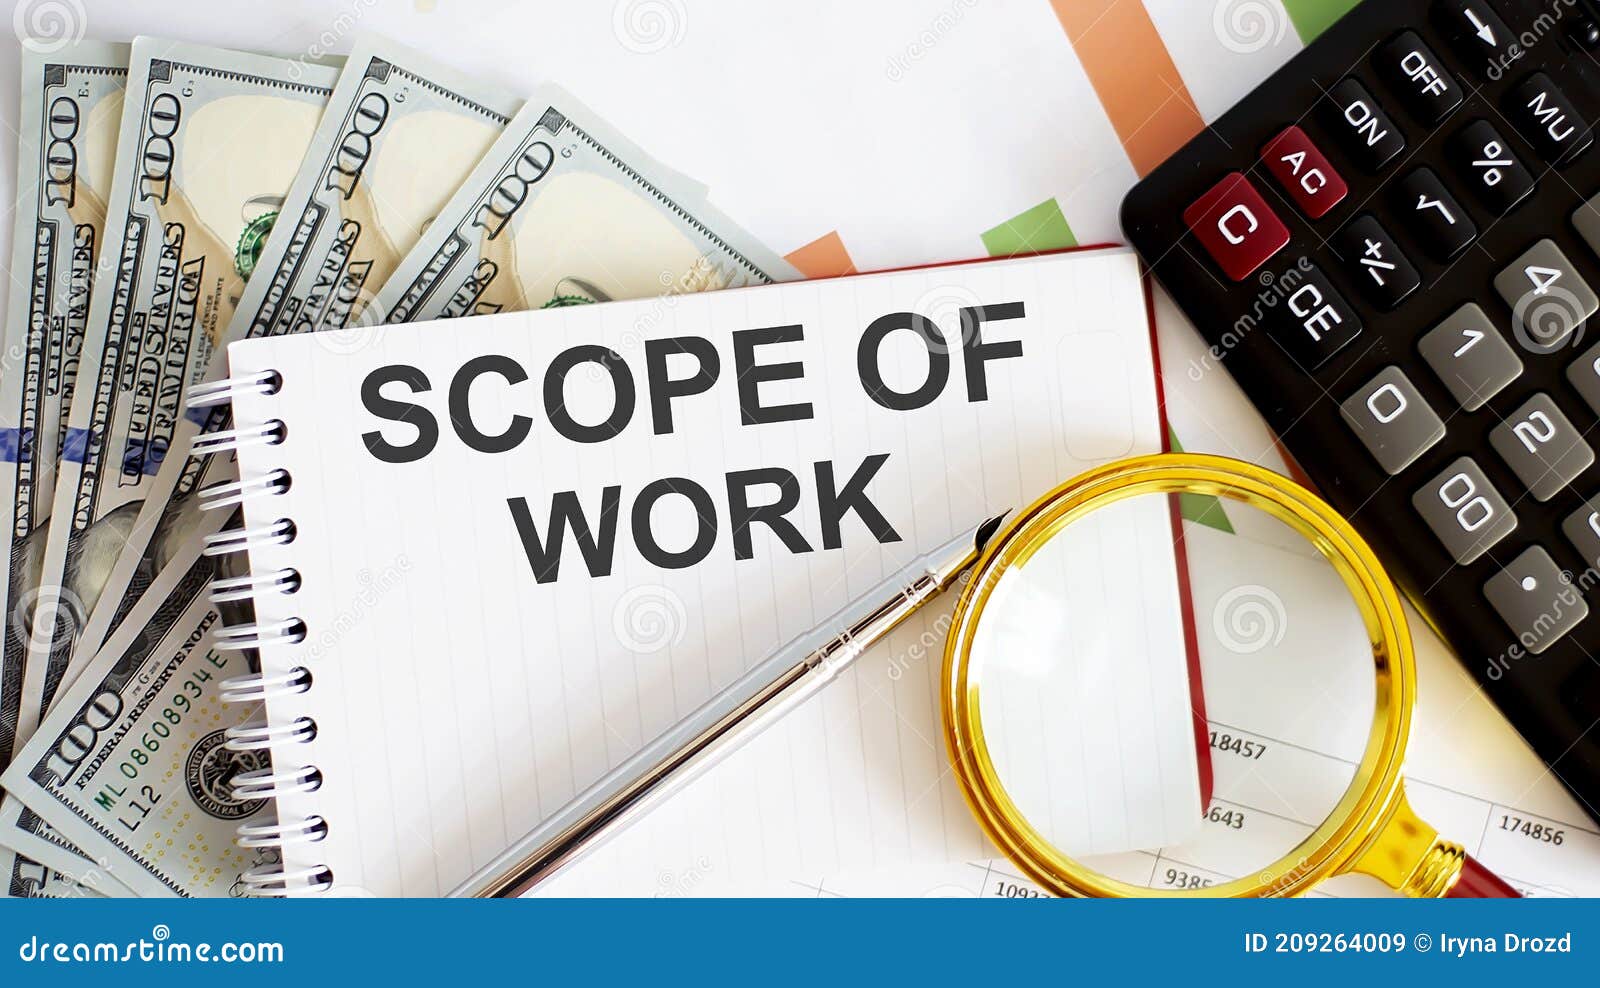 Word Writing Text SCOPE of WORK . Business Concept with Chart, Dollars and  Office Tools Stock Image - Image of vision, idea: 209264009